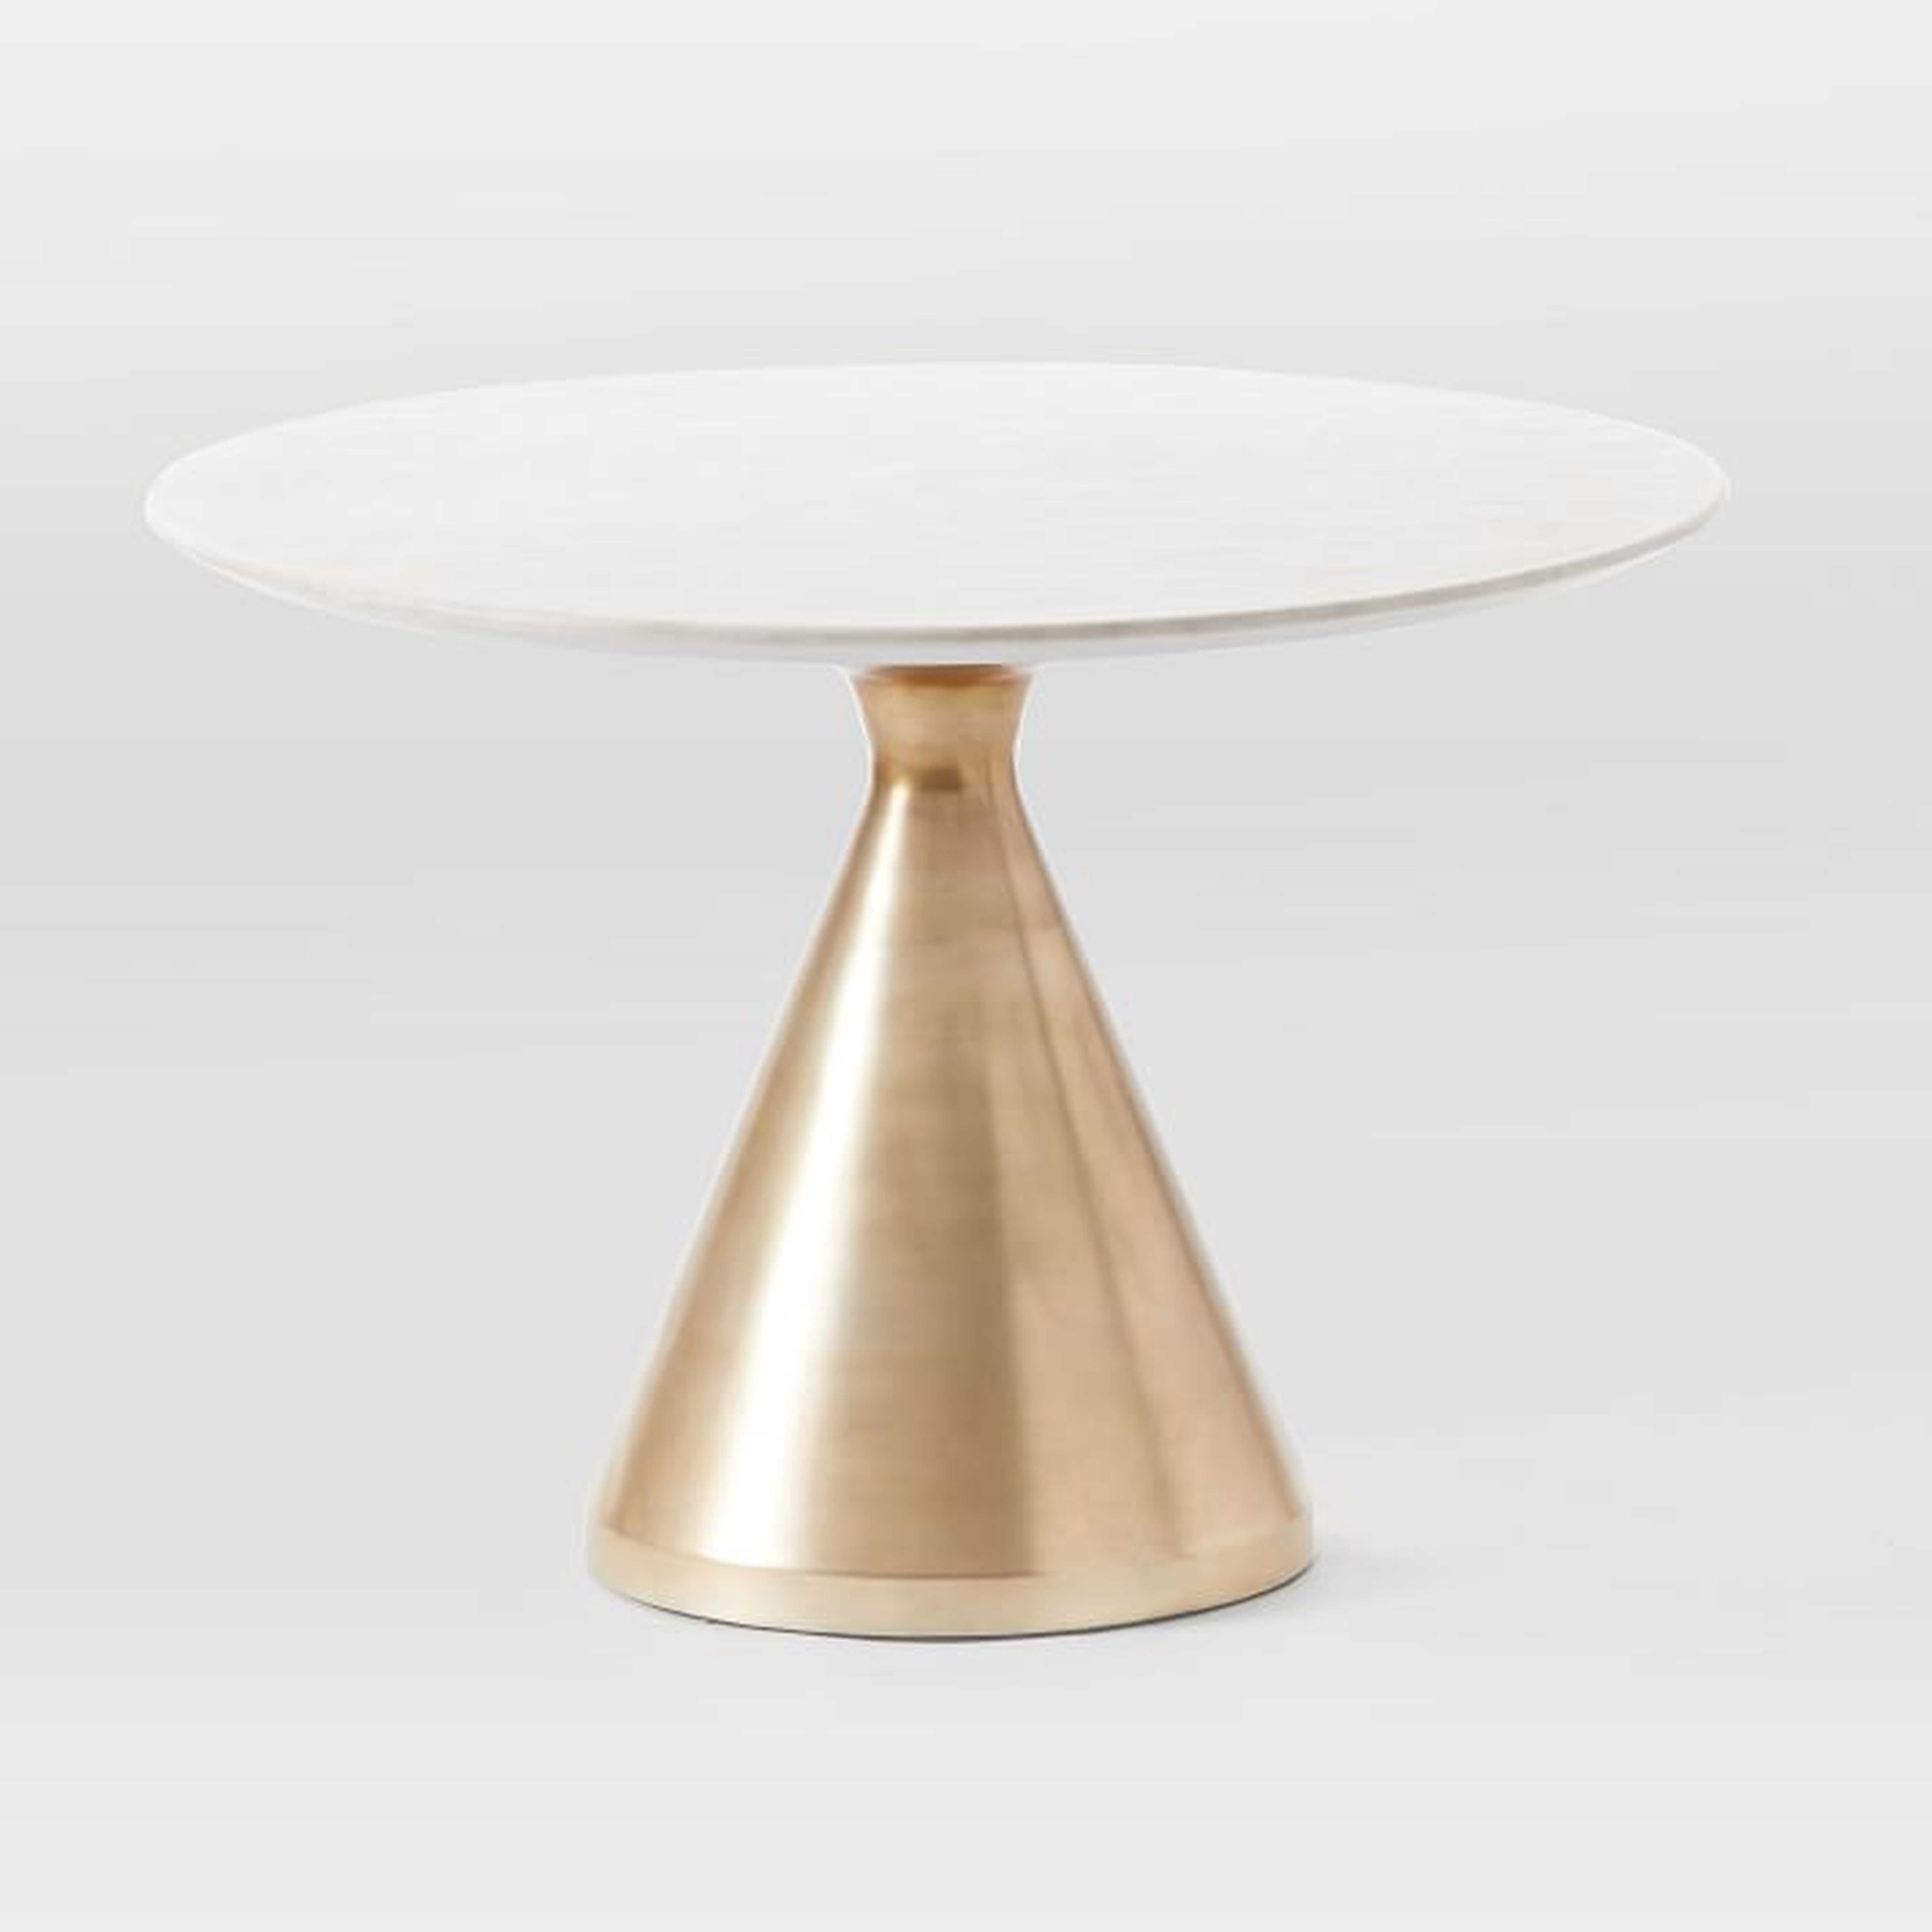 Silhouette Pedestal Dining Table, Round White Marble, Large, Antique Brass, 44" - West Elm